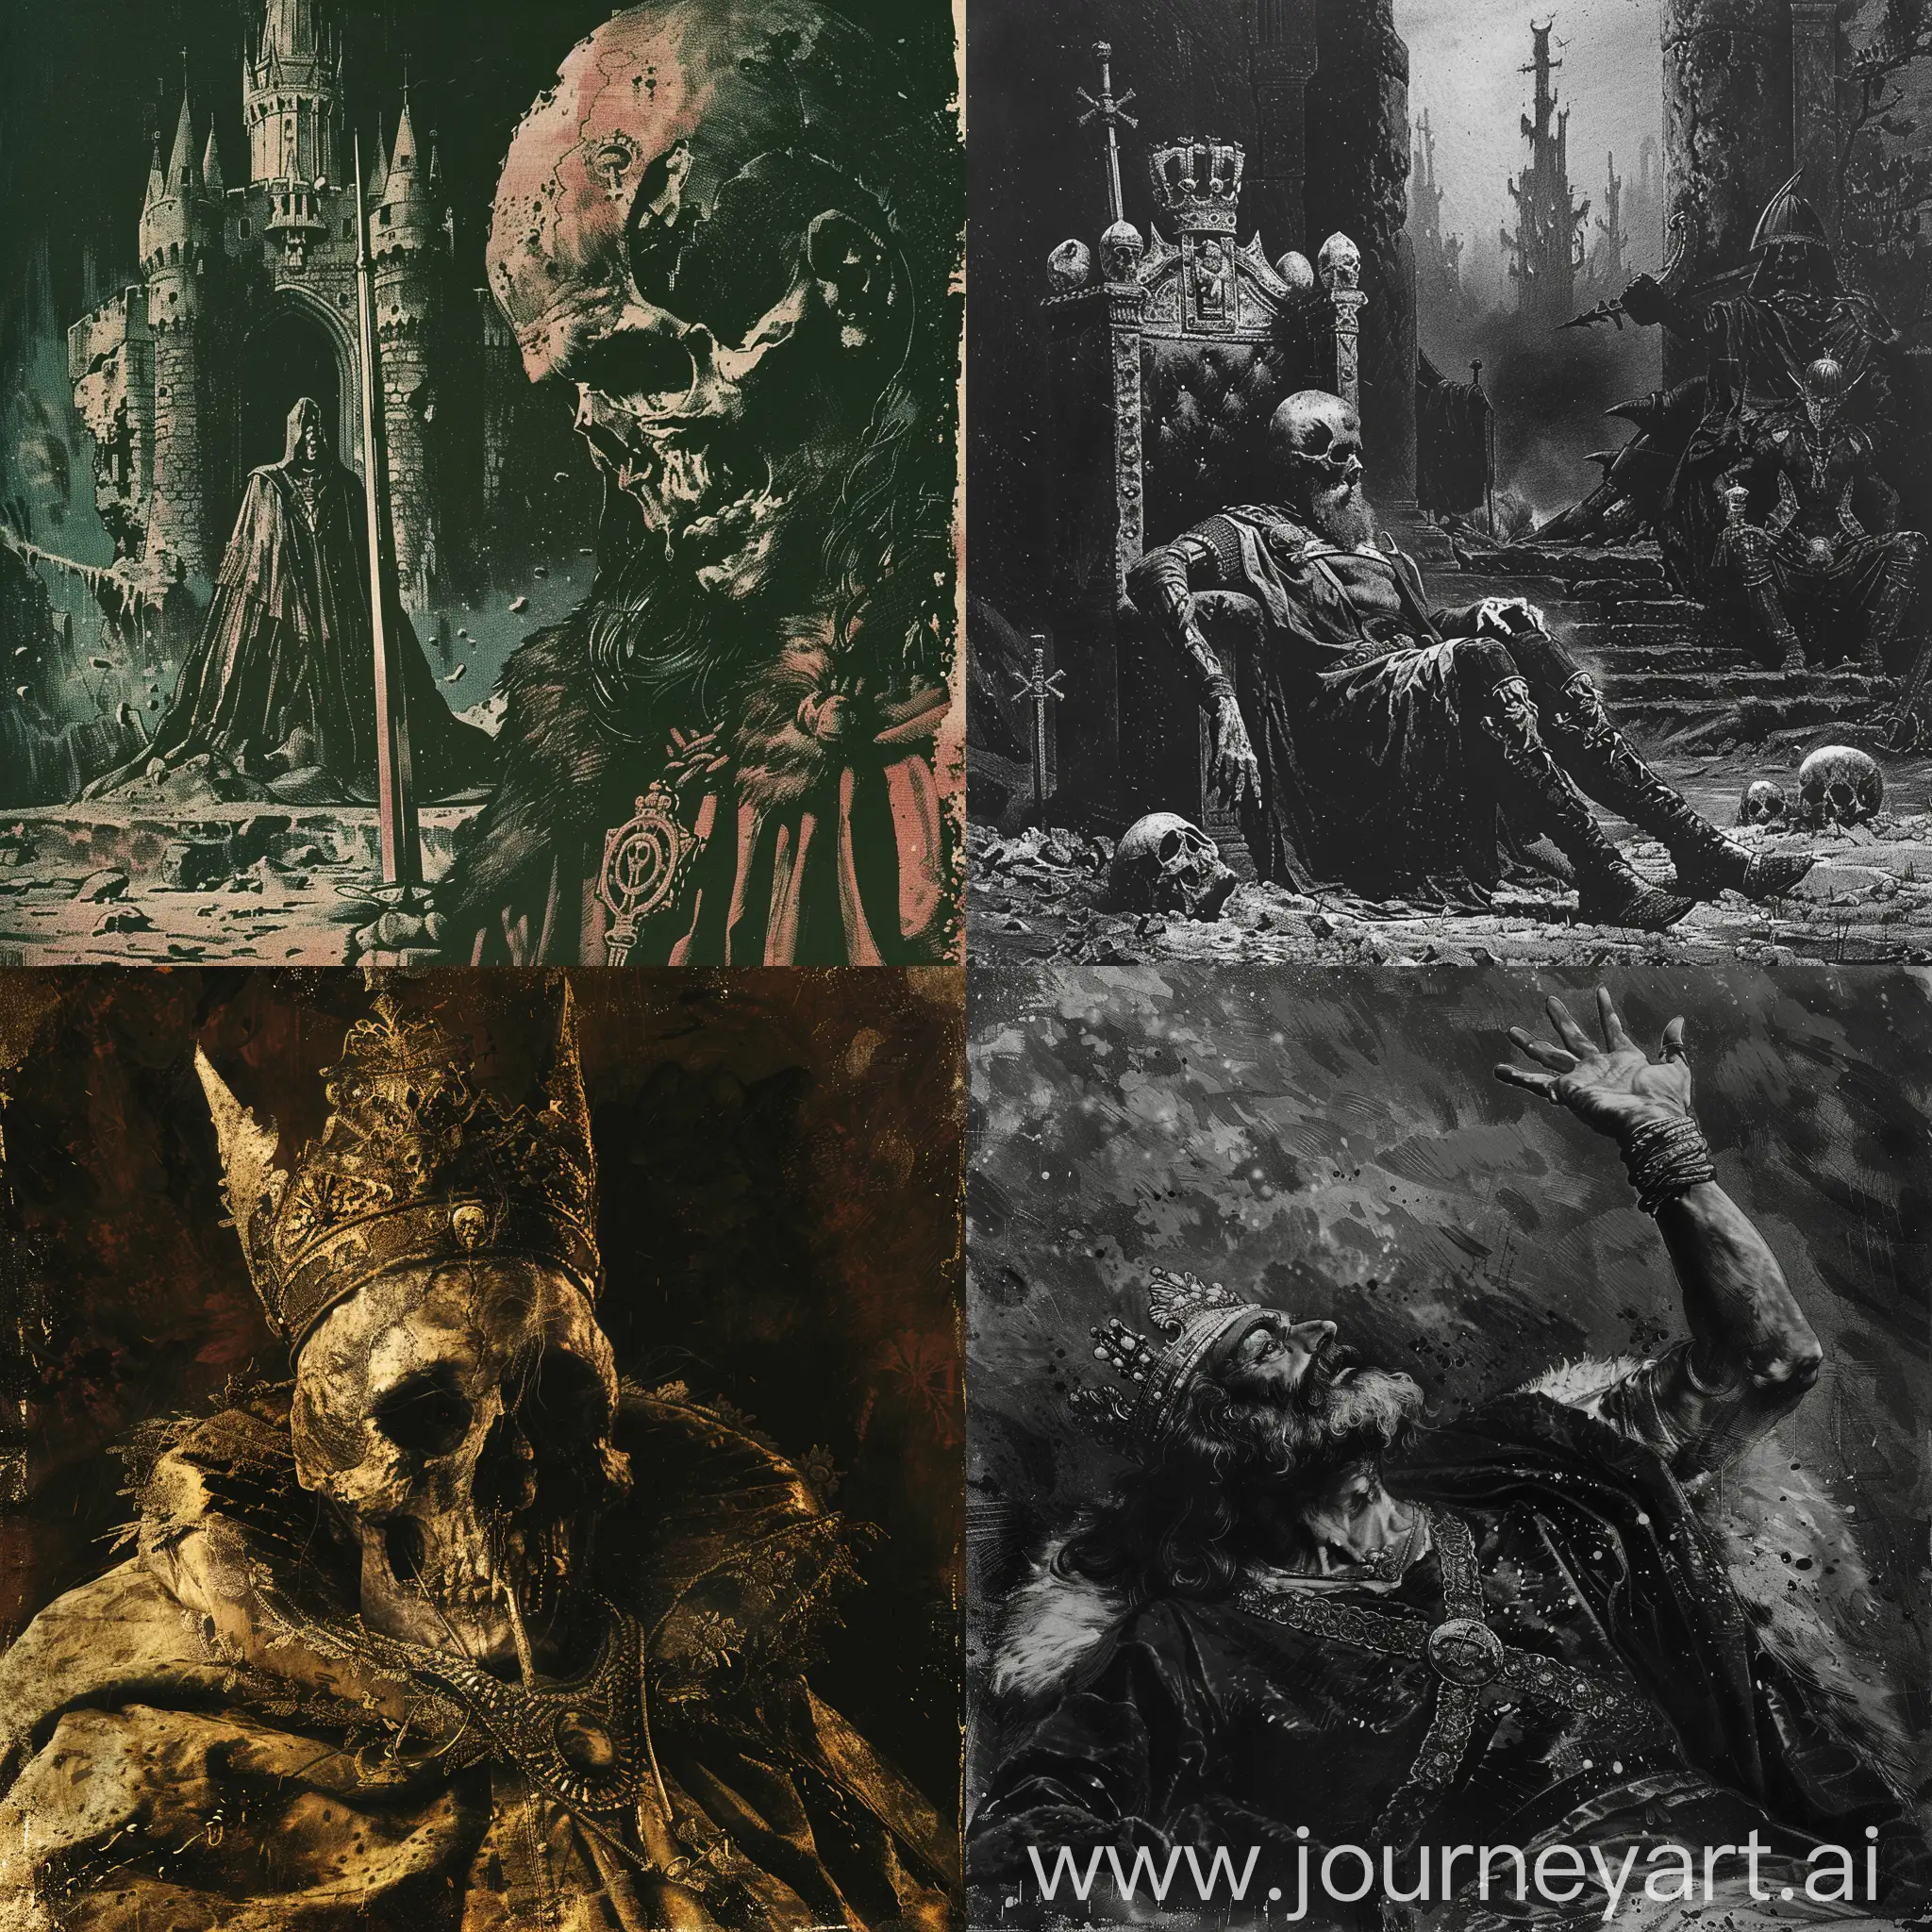 Gritty-Vintage-Dark-Fantasy-Art-Mysterious-Death-of-the-King